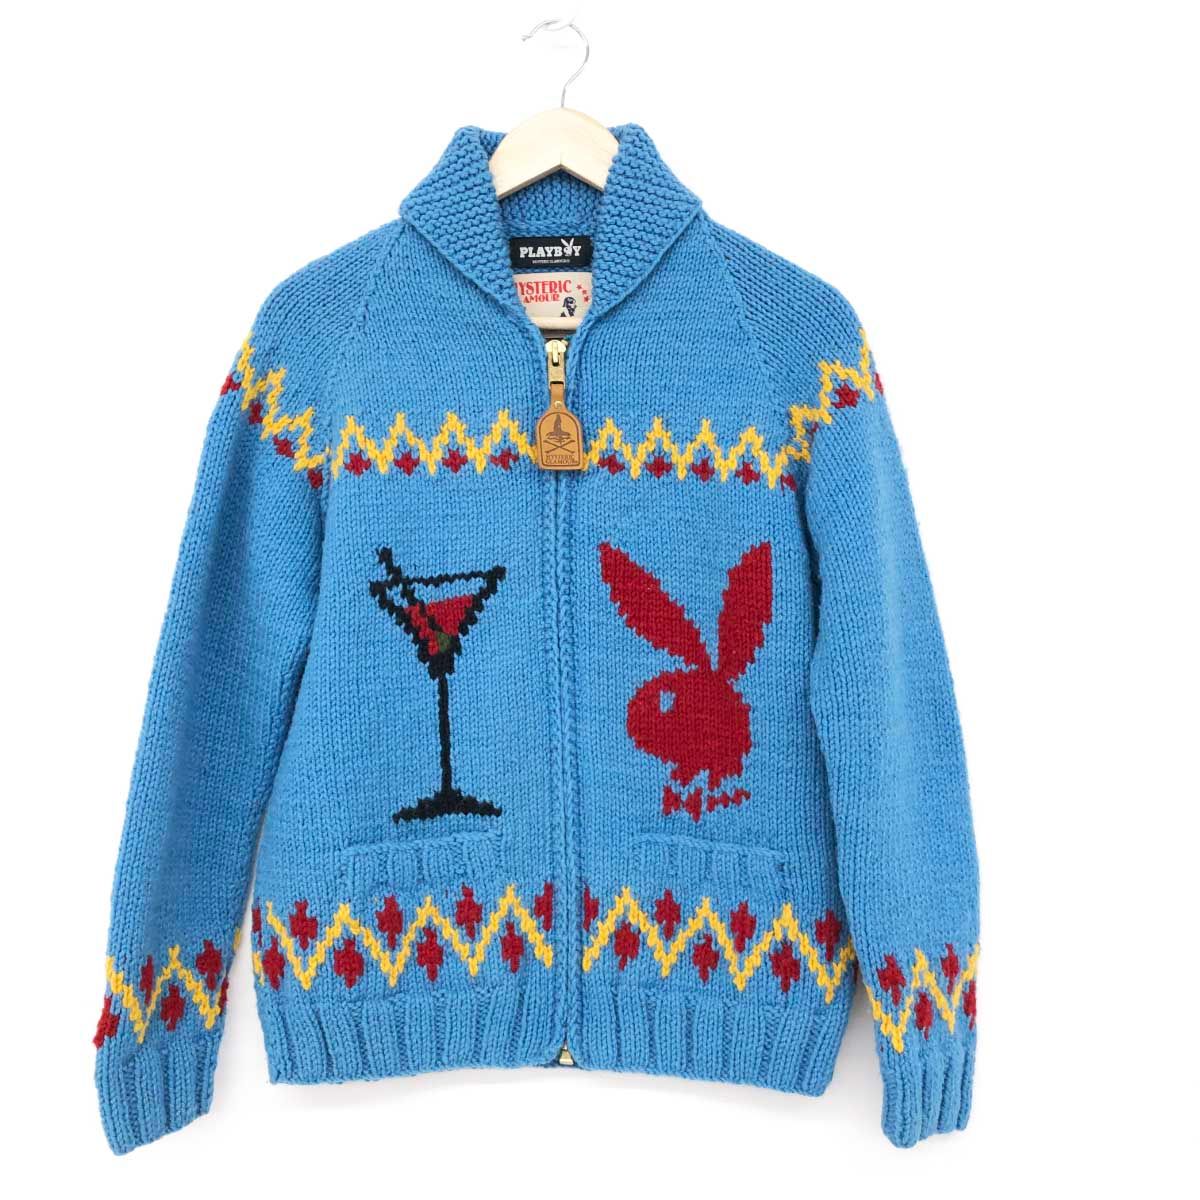 Hysteric Glamour HYSTERIC GLAMOUR Cowichan Knit Cardigan Blue M